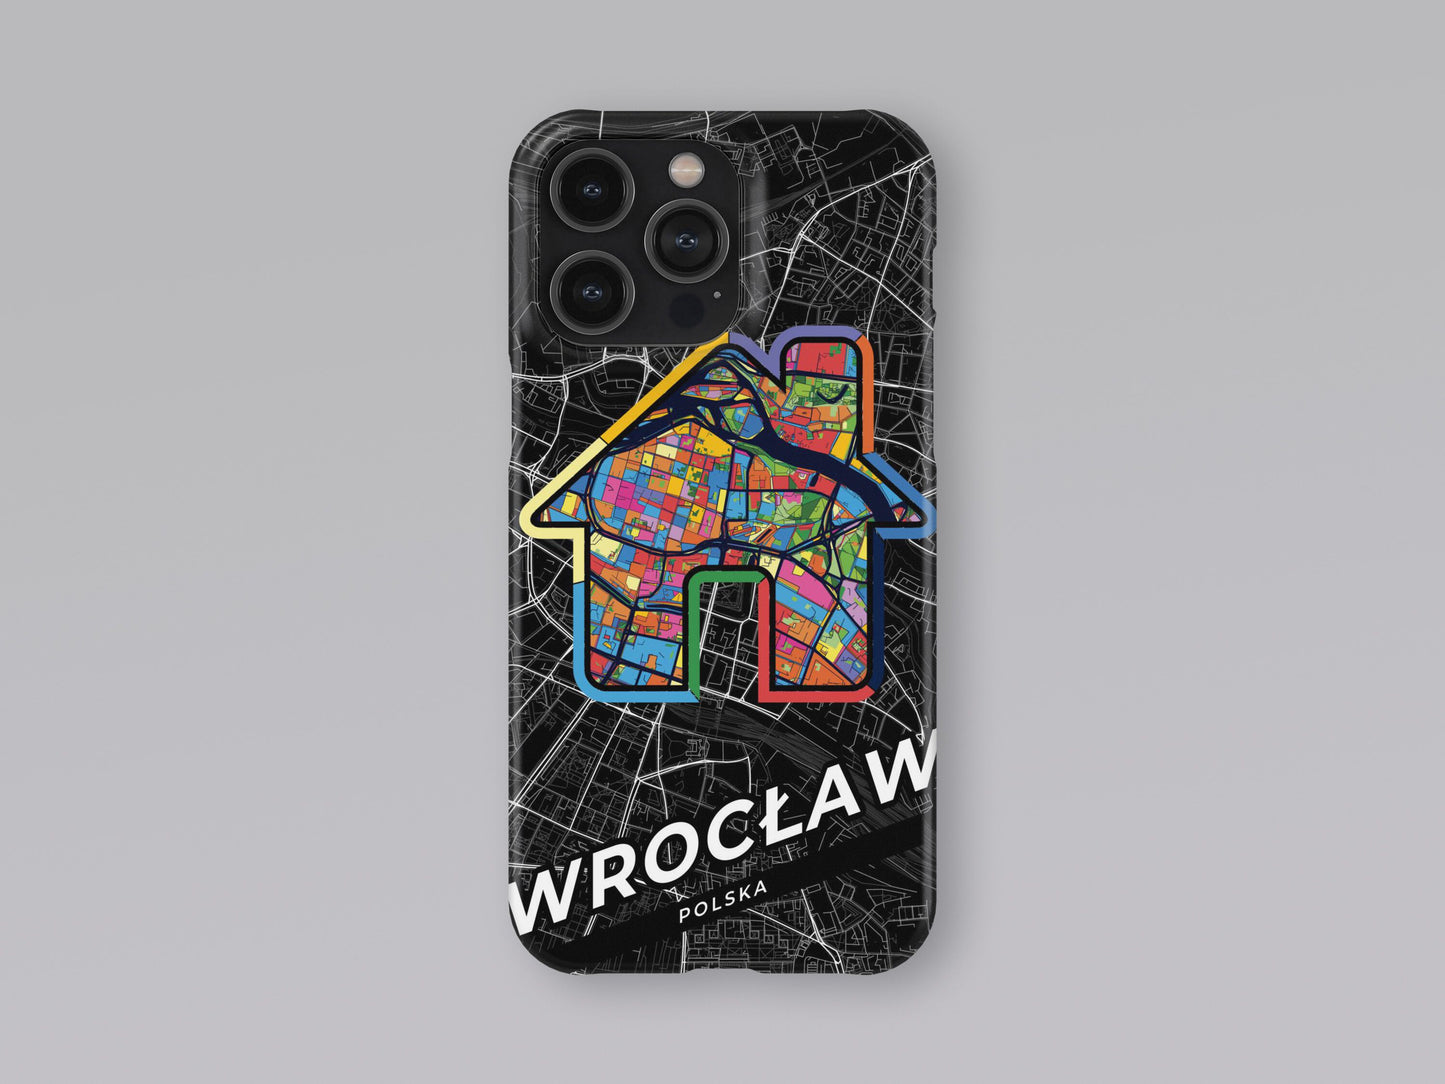 Wrocław Poland slim phone case with colorful icon 3